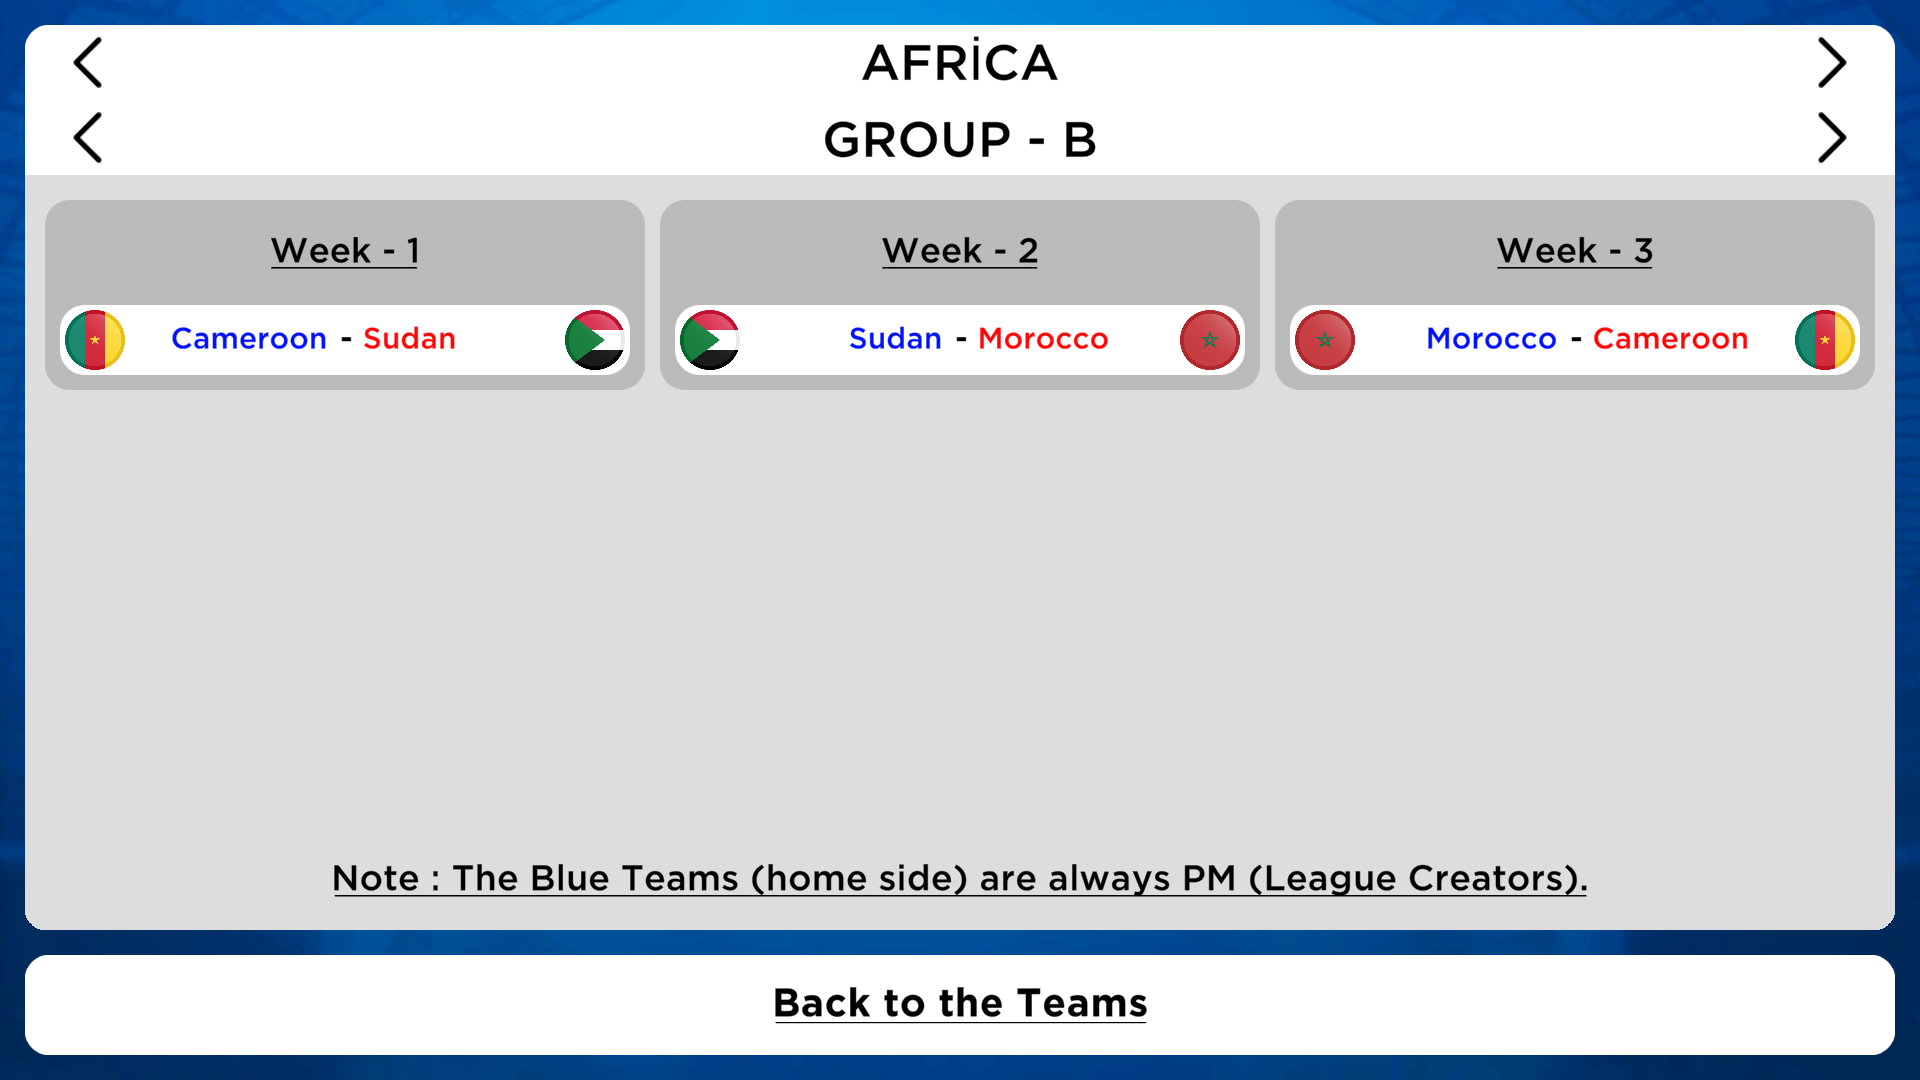 ae16d743-62c2-446b-ba67-35ee8937a81a-Africa - Fixture - Group B.png